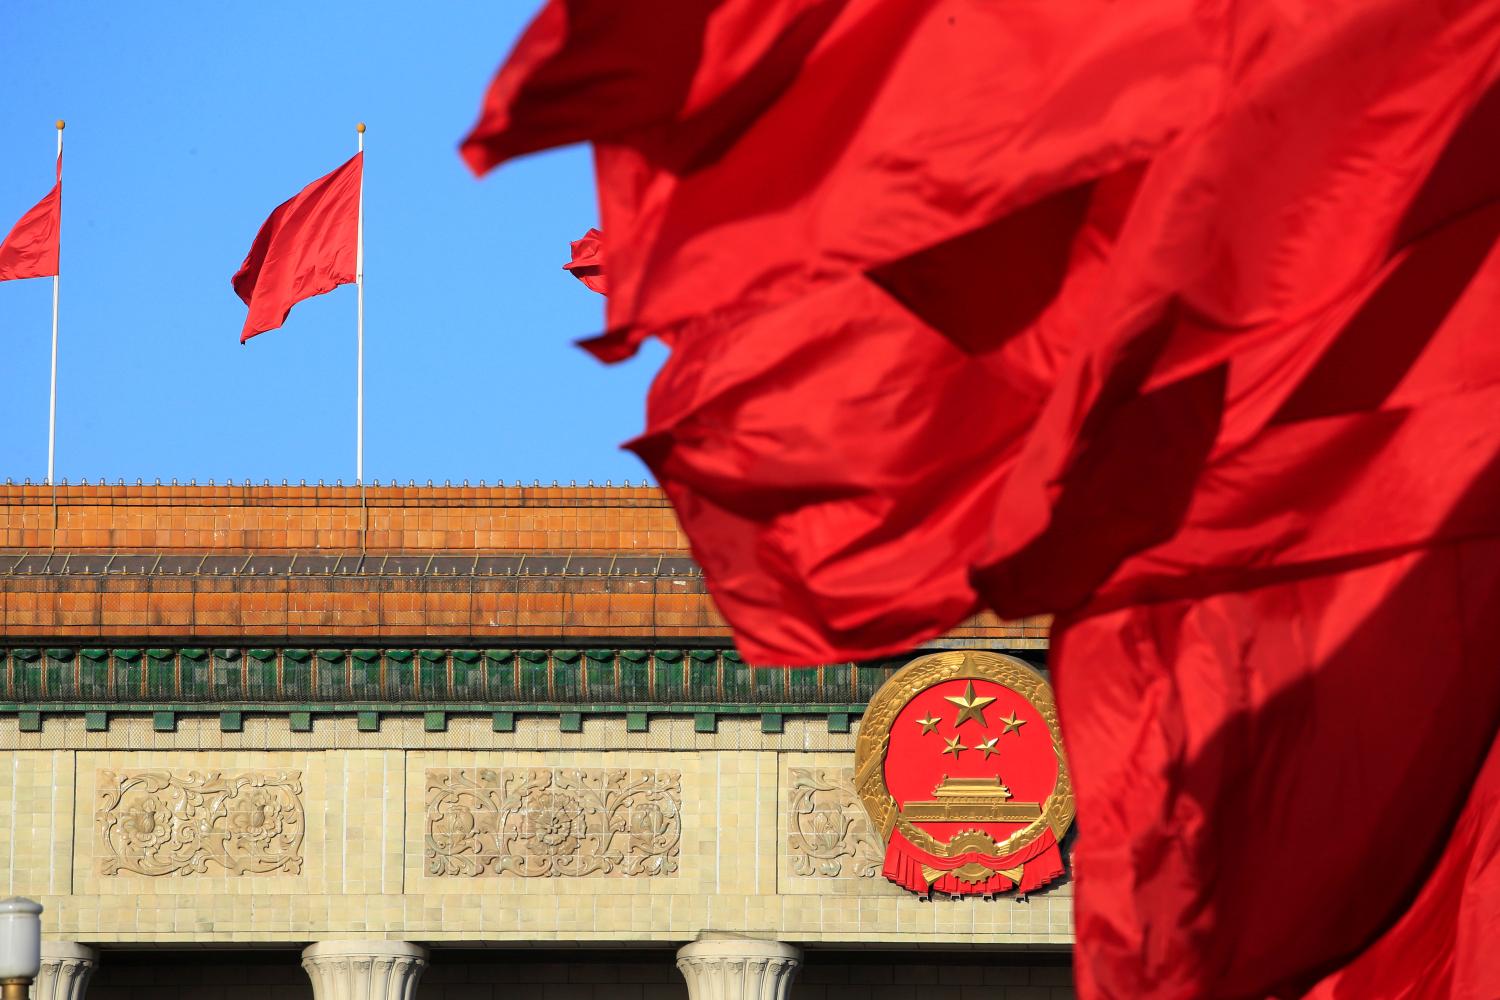 Red flags flutter outside the Great Hall of the People before the second plenary session of the Chinese People's Political Consultative Conference (CPPCC) in Beijing, China March 8, 2018.